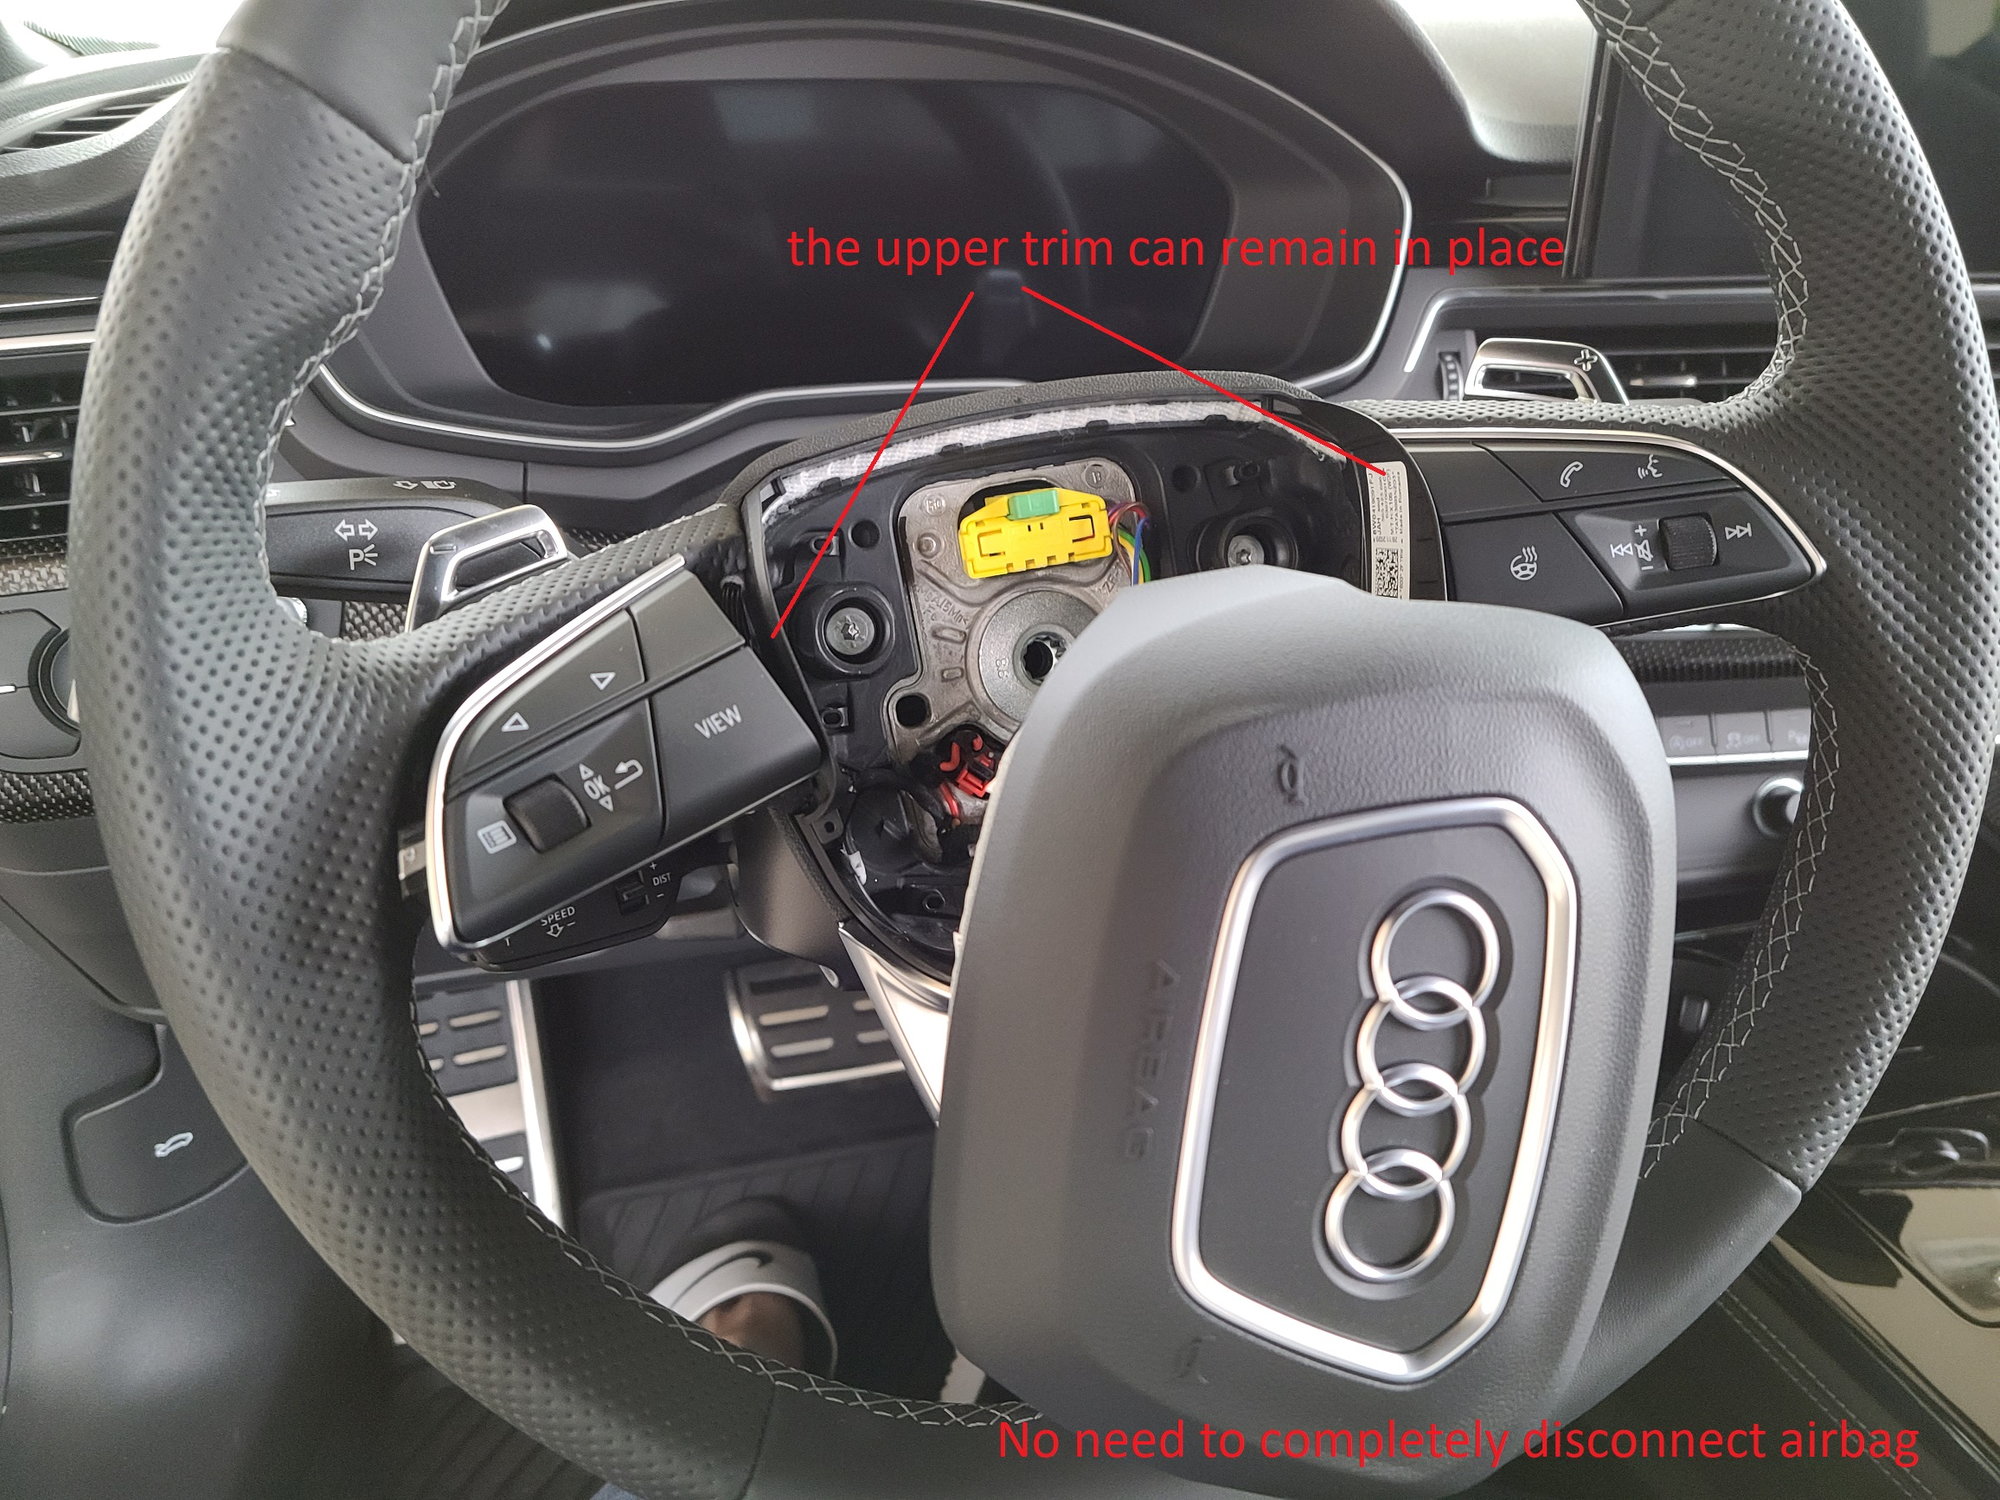 Paddle shifter replacement on B9.5 - AudiWorld Forums